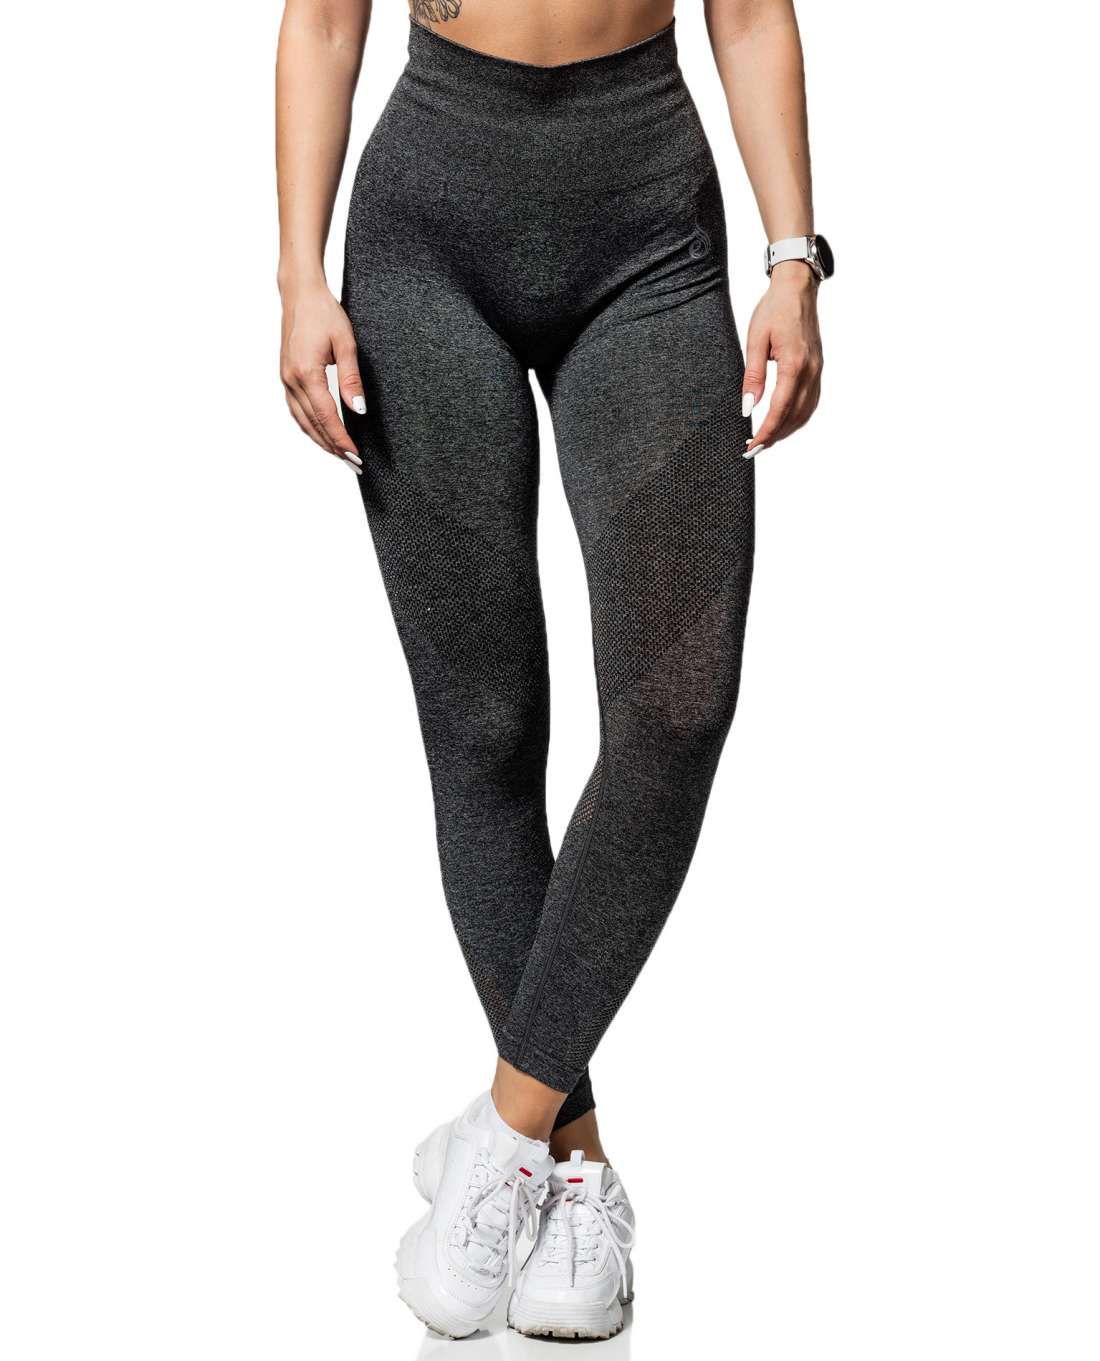 Seamless Tights Charcoal Ryderwear